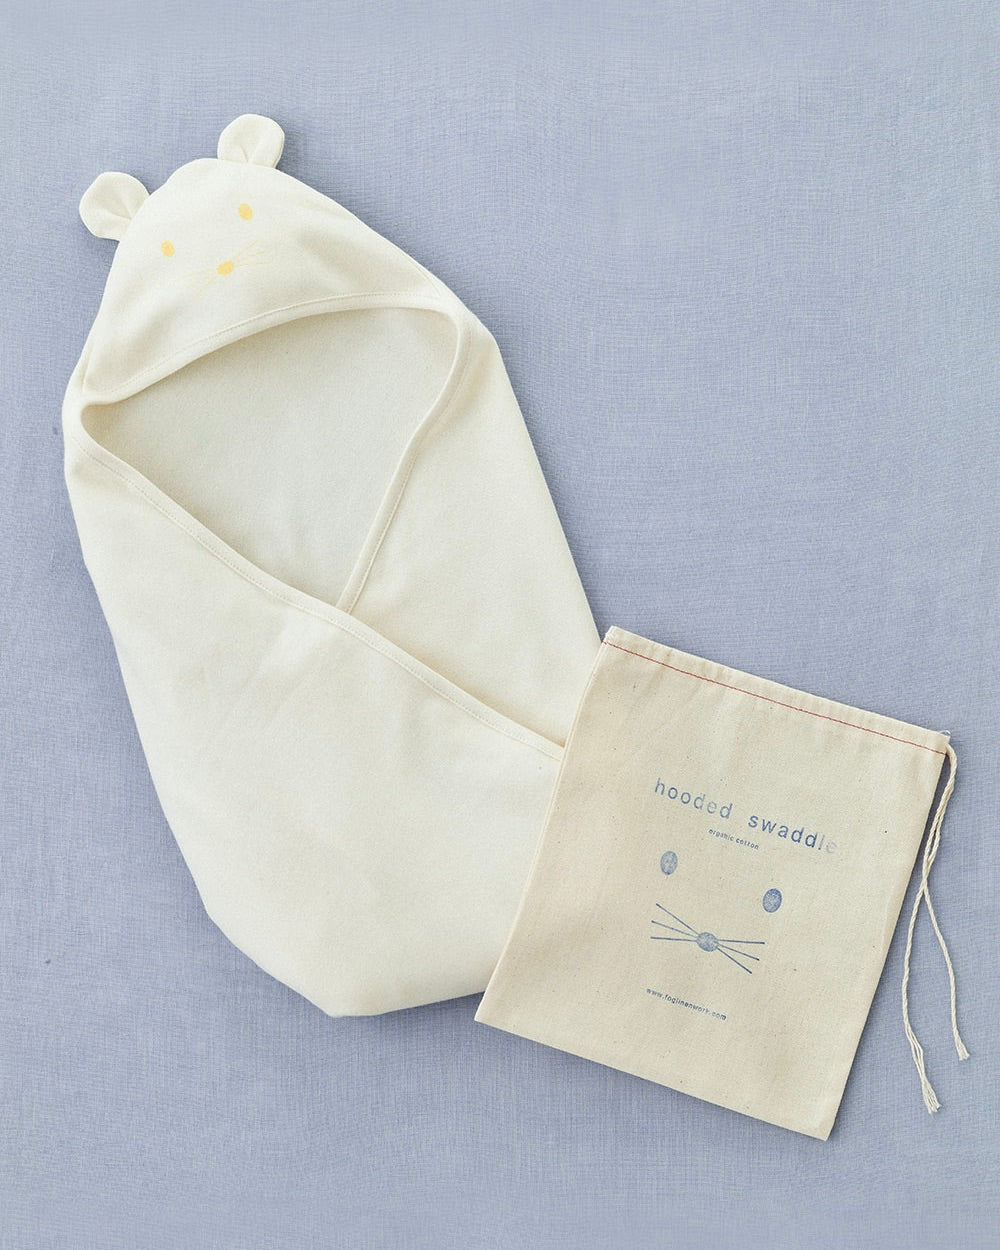 Hooded Cotton Swaddle